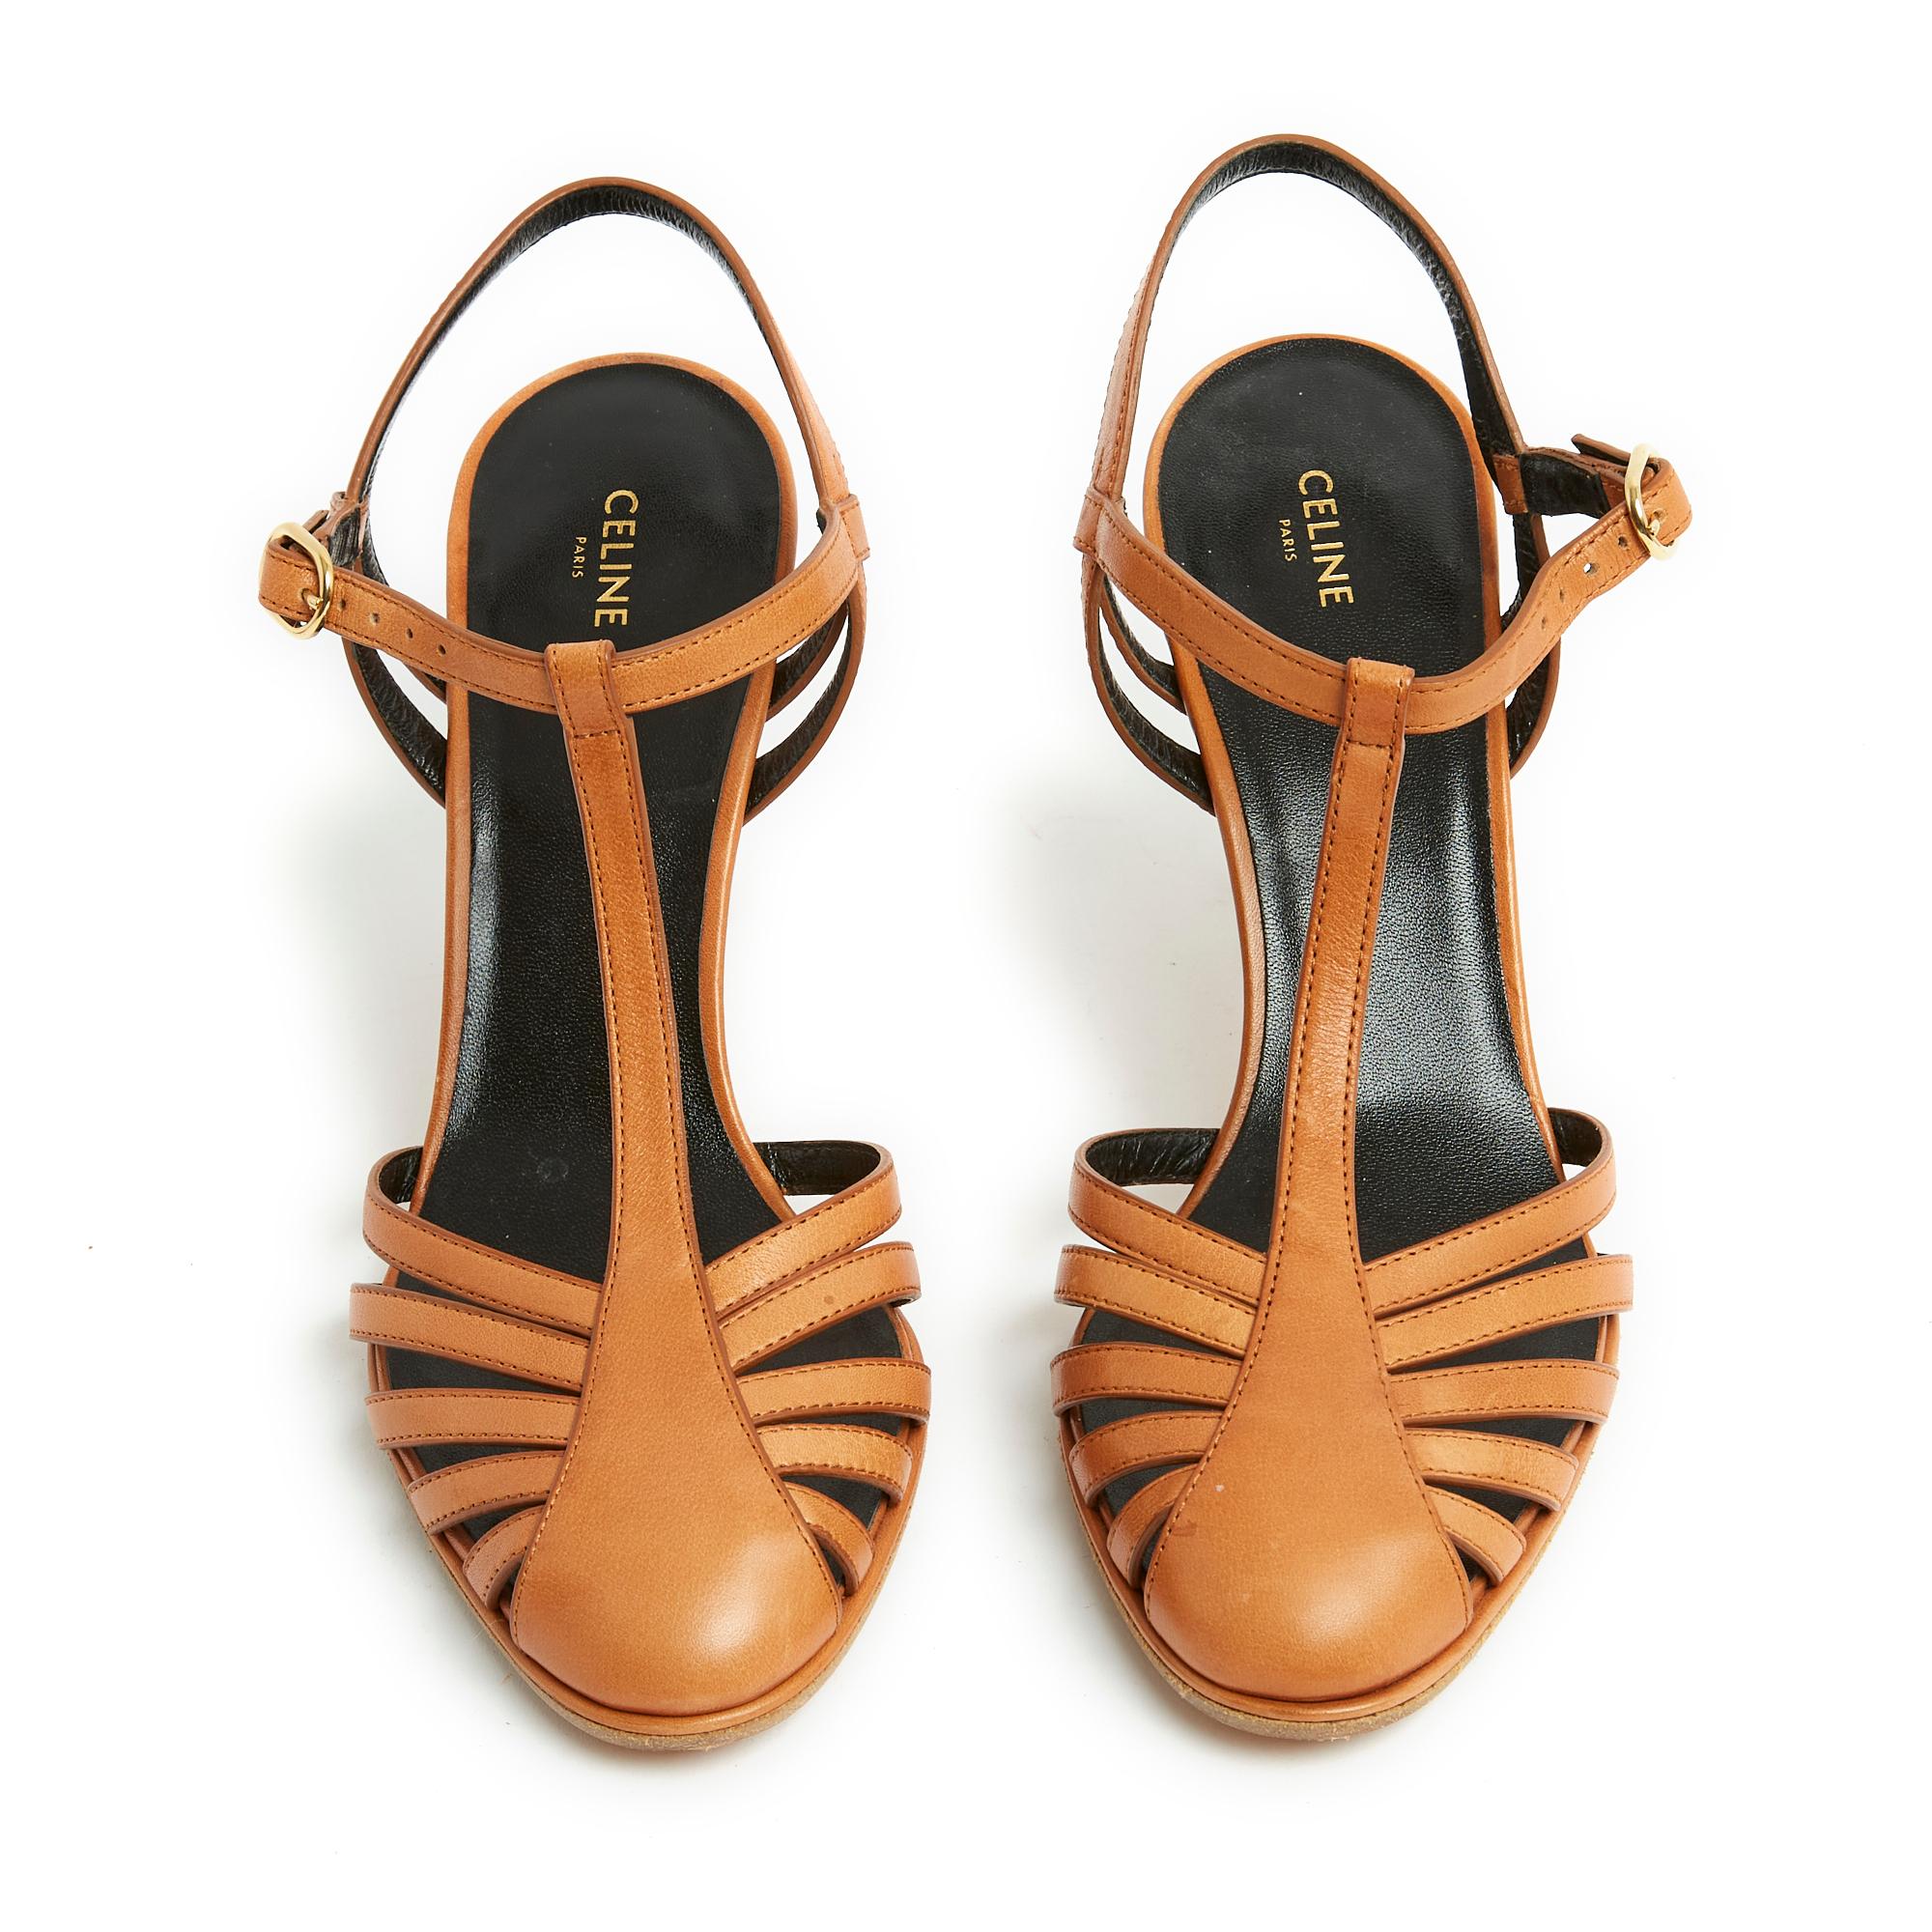 Celine pumps by Hedi Slimane Triomphe model sandals in tan-colored leather or natural leather with fine straps on the front of the foot and around the ankle, closed with a gold metal pin buckle, heel covered in leather. Size EU39 UK5.5 US7.5: heel